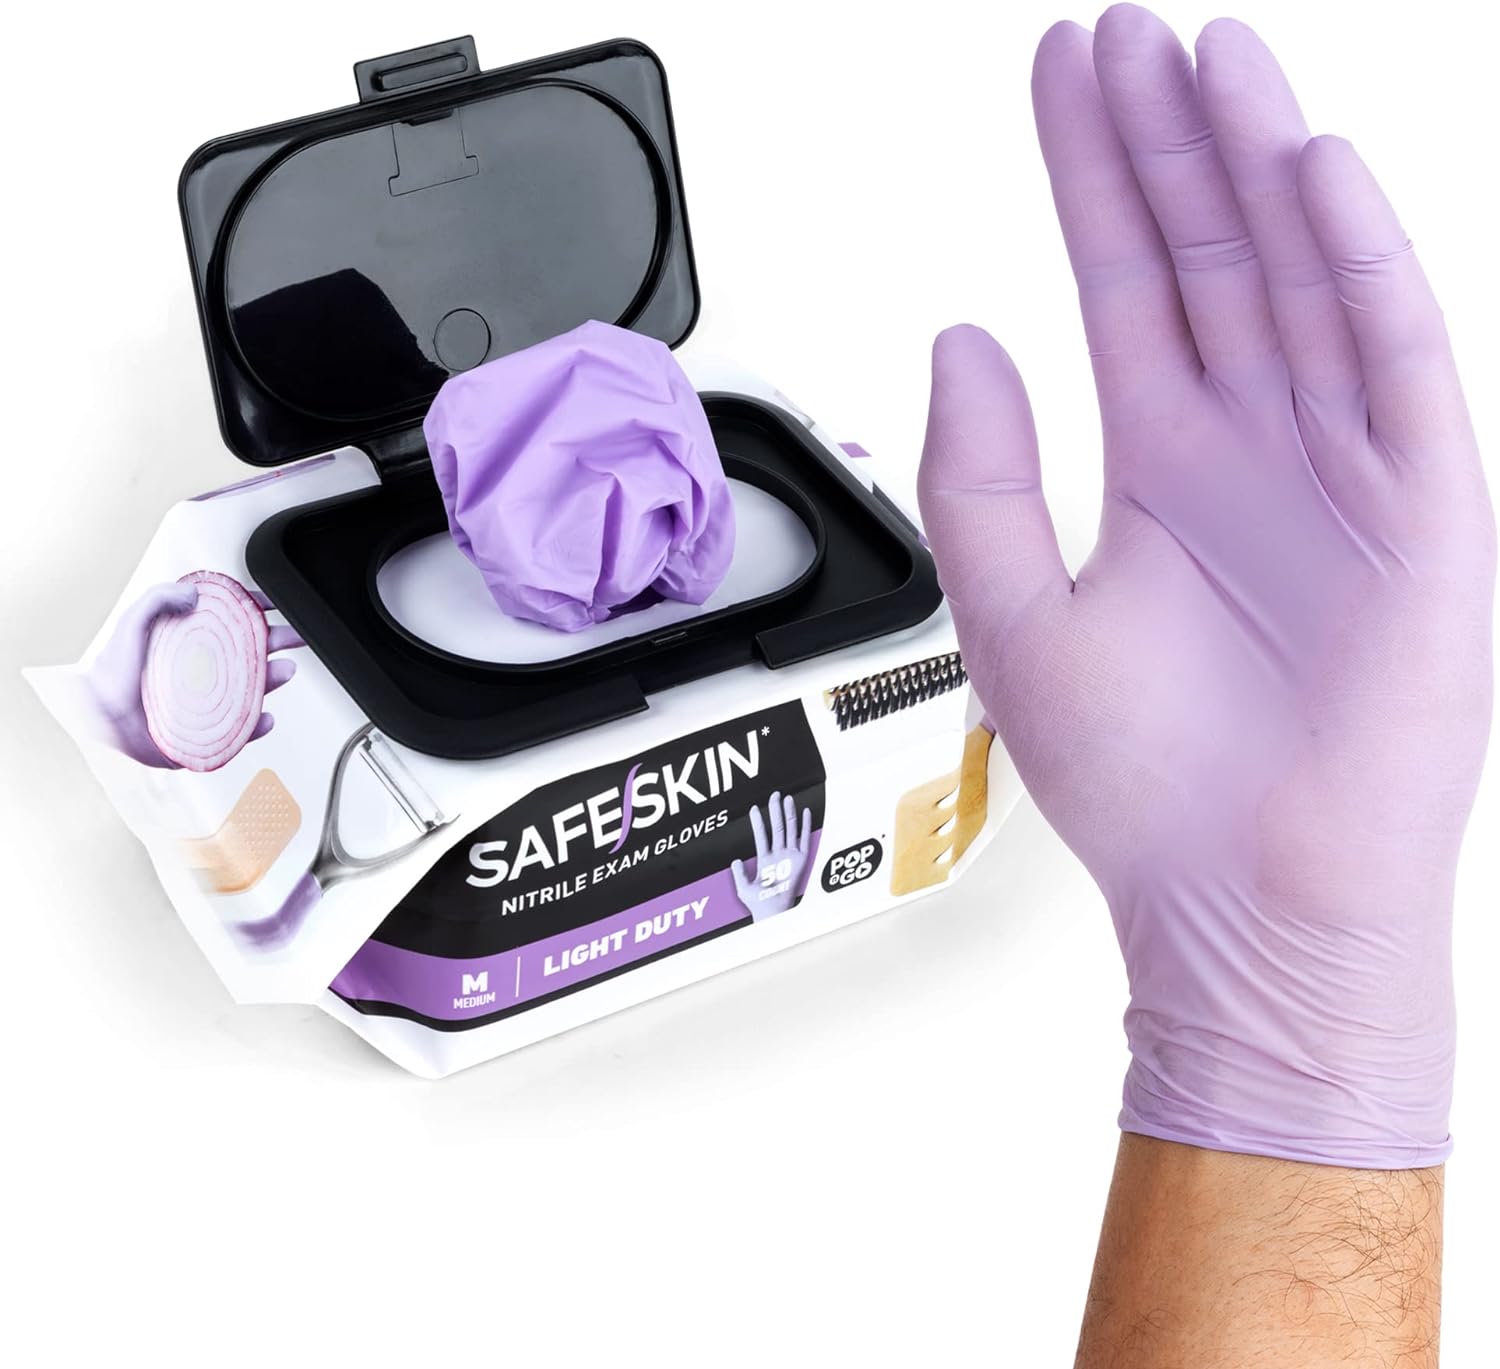 SAFESKIN Disposable Nitrile Gloves in POP-N-GO Pack of 50 or 200 Powder Free - Hair, Cleaning, Medical Use, Food Handling